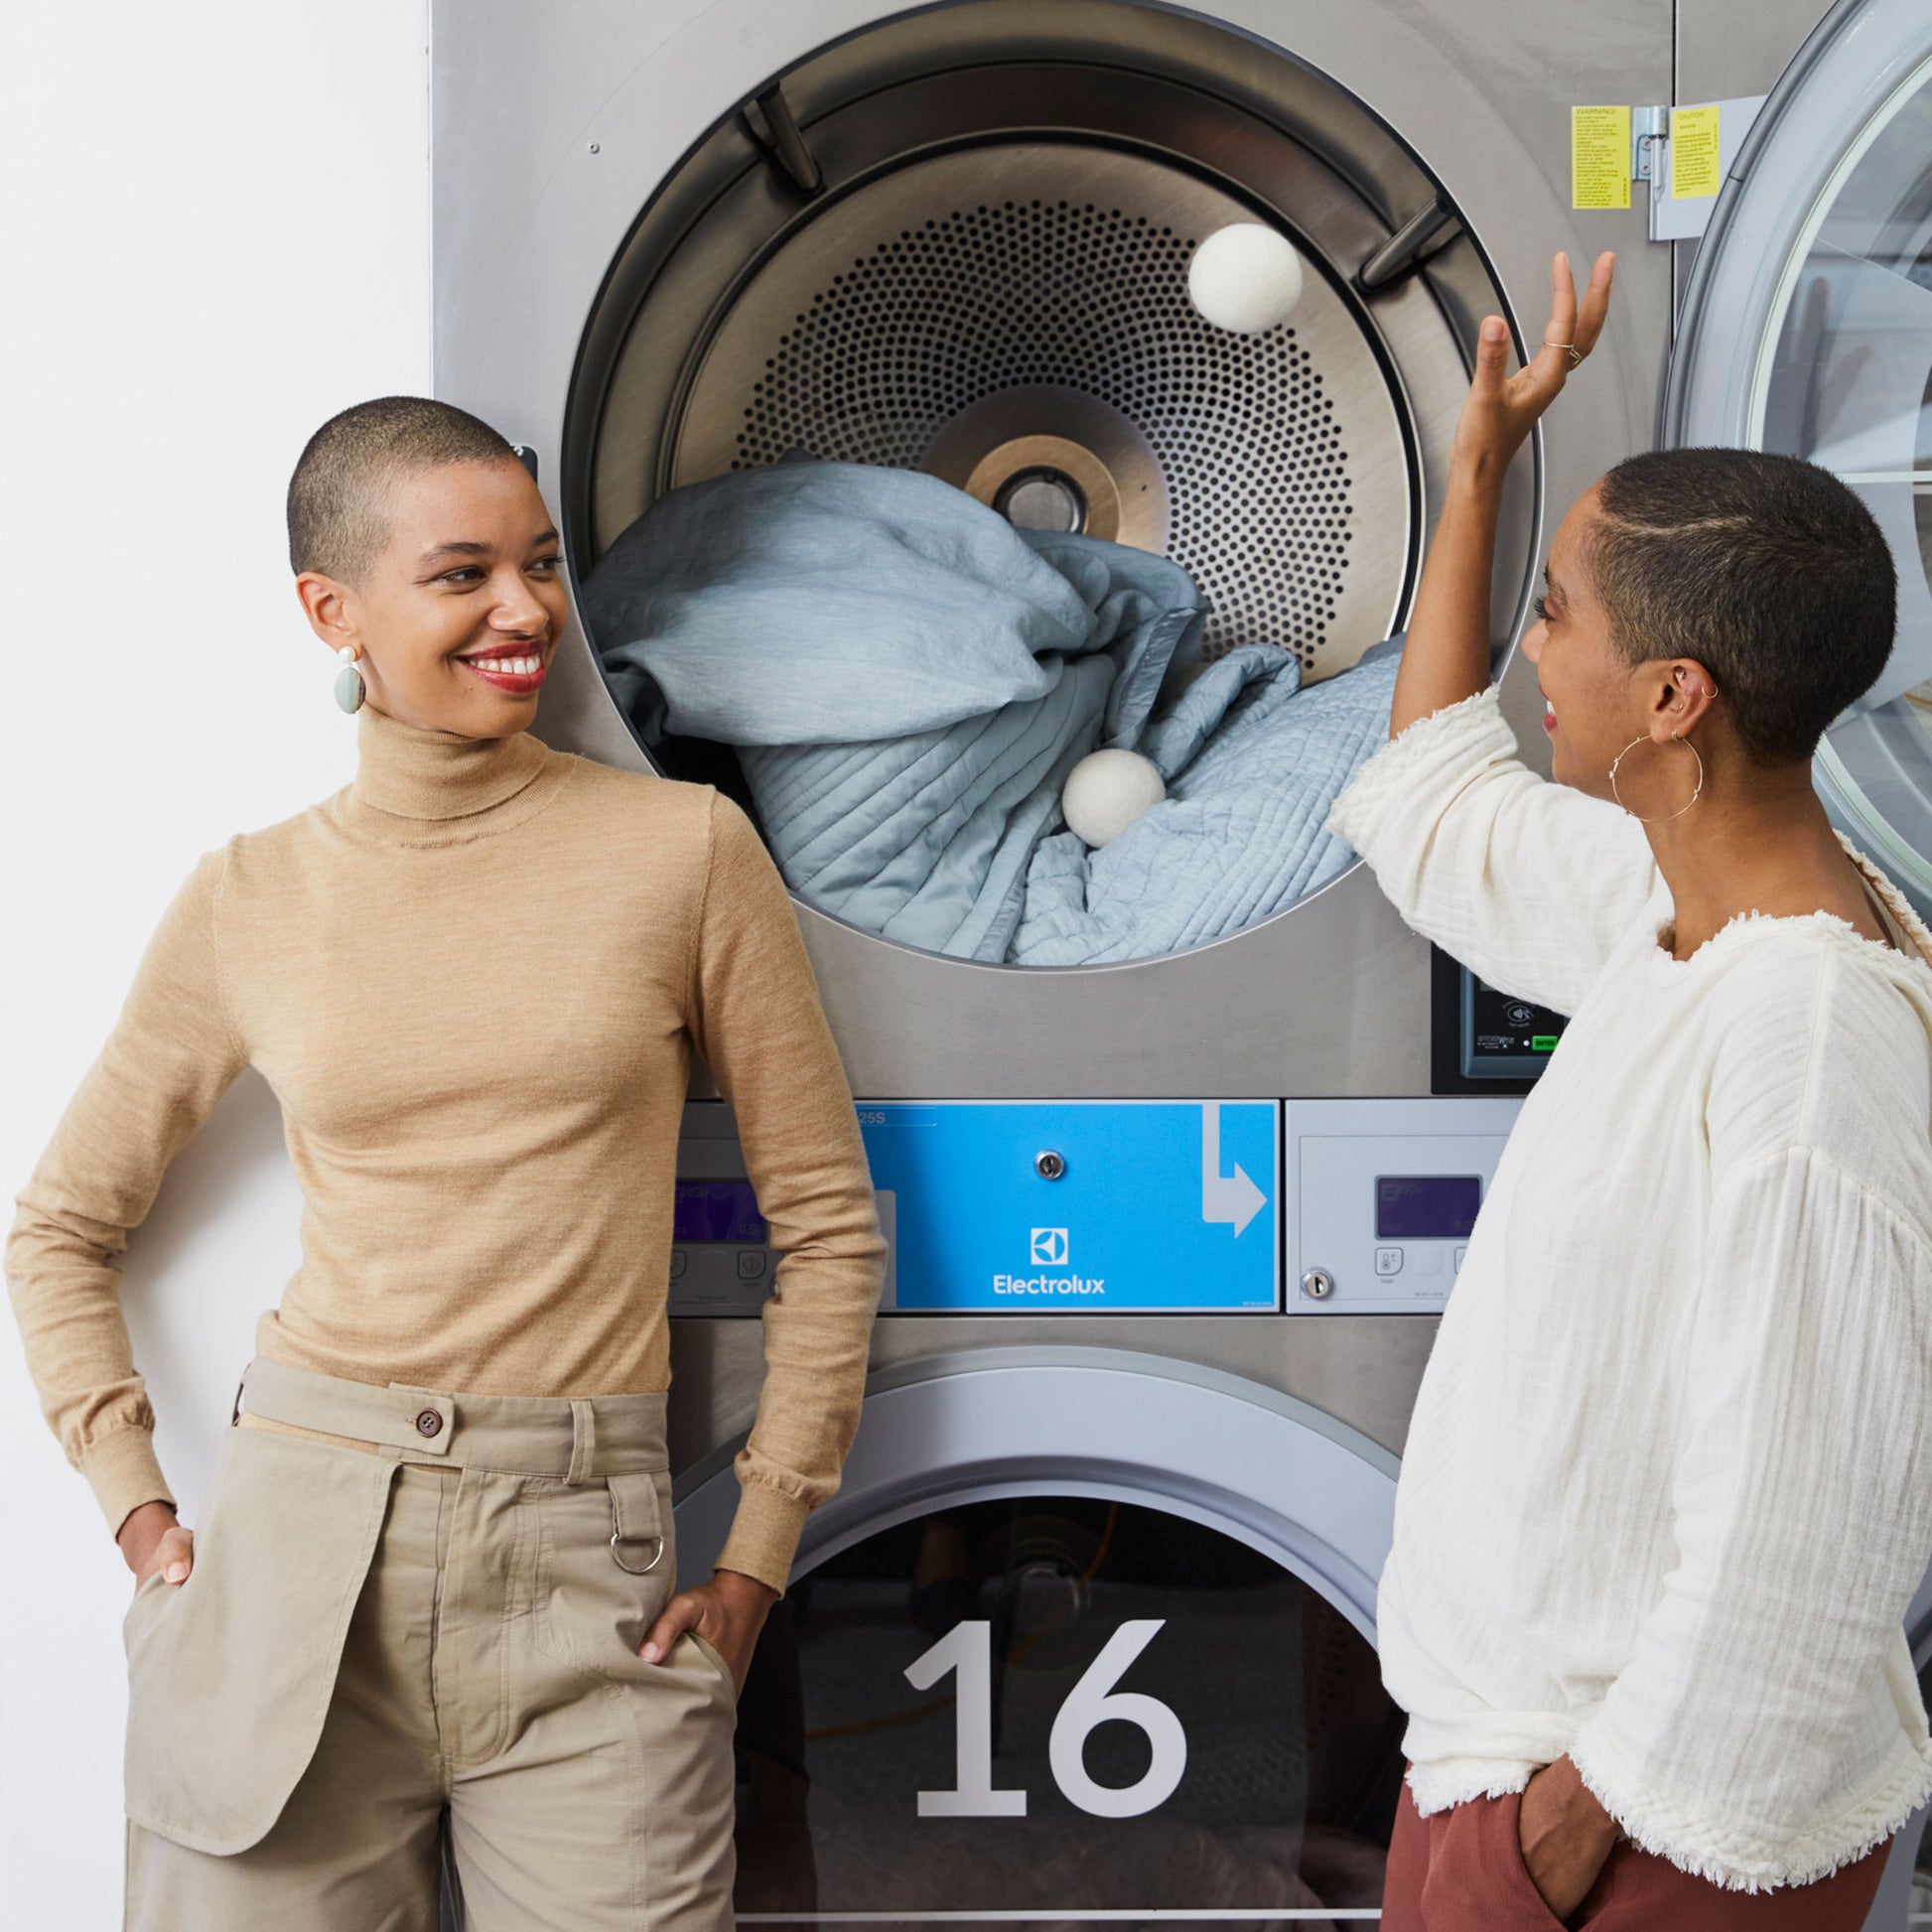 Theresa Williams smiles at her sister Corinna who is tossing a white wool dryer ball into a dryer filled with blue bed linens